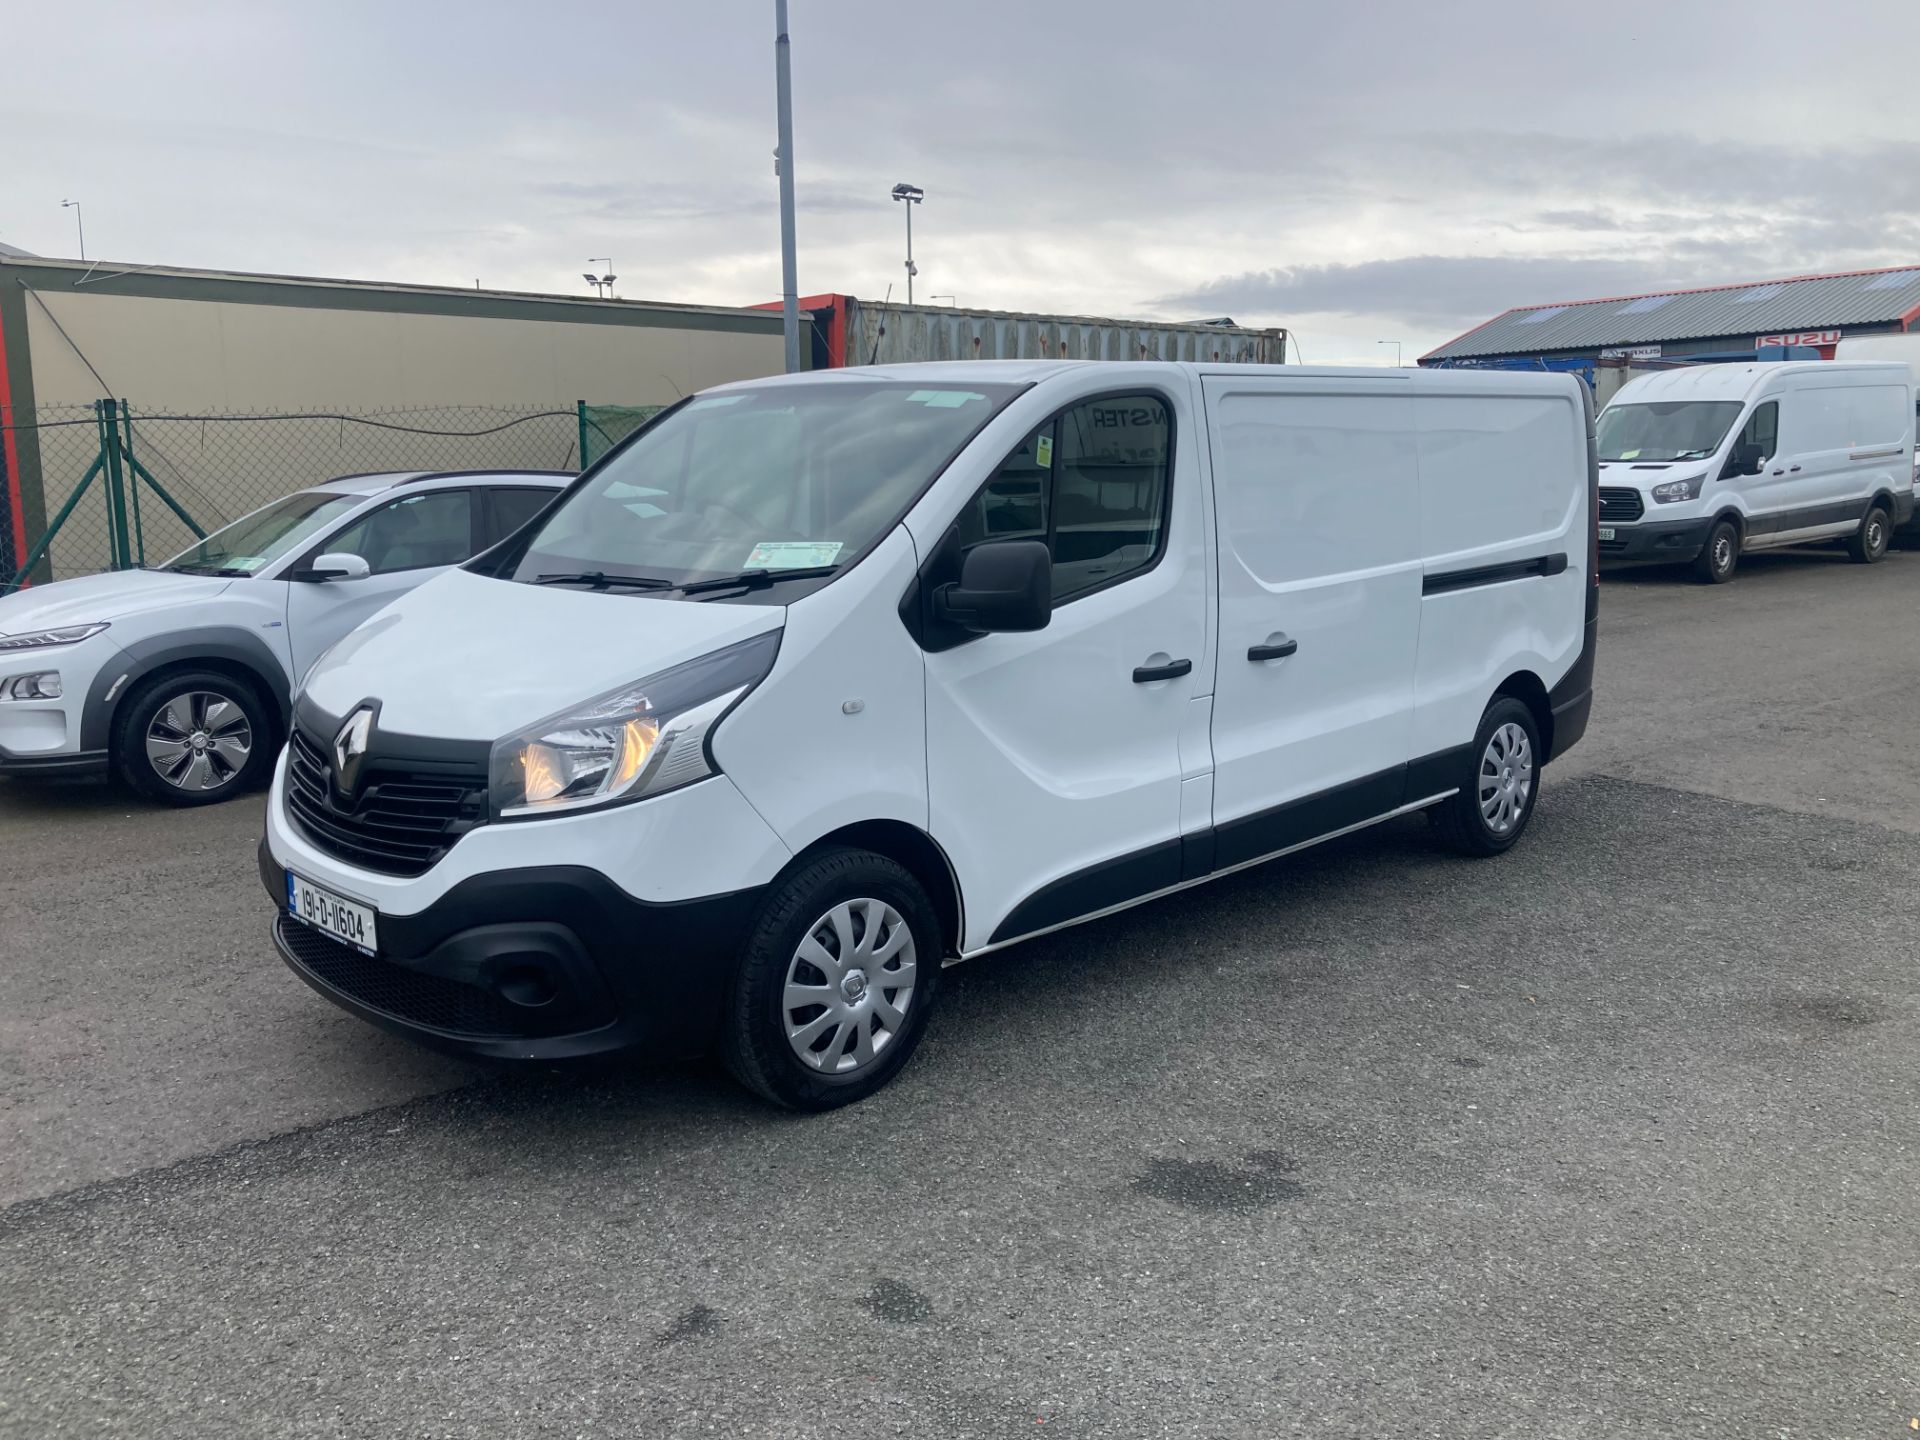 2019 Renault Trafic LL29 DCI 120 Business (191D11604) Thumbnail 3